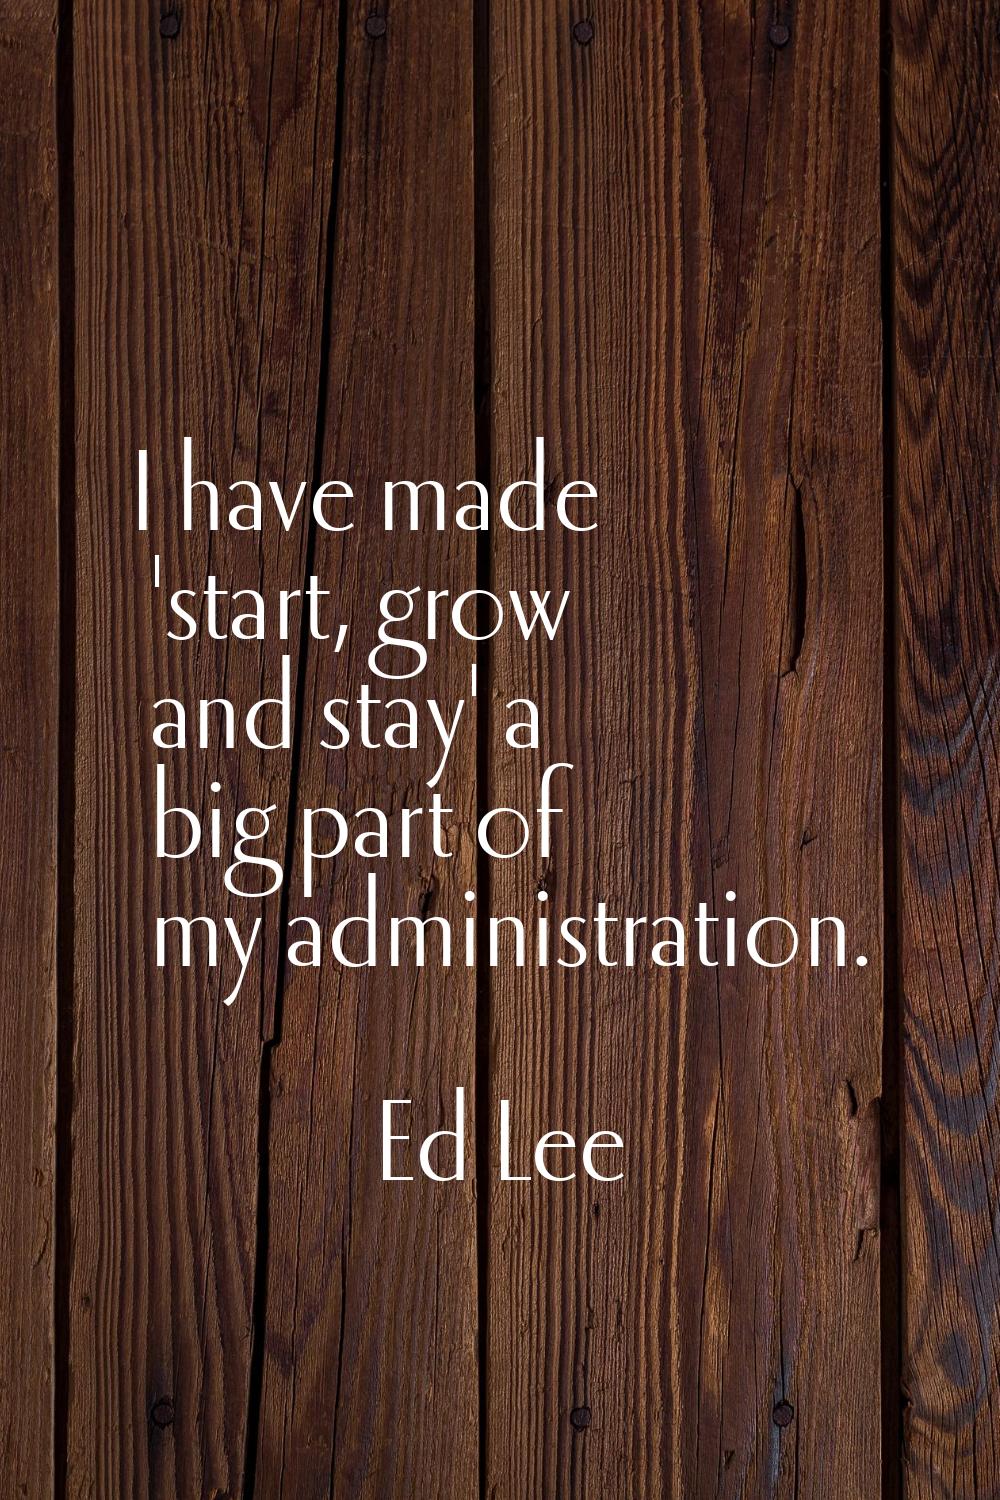 I have made 'start, grow and stay' a big part of my administration.